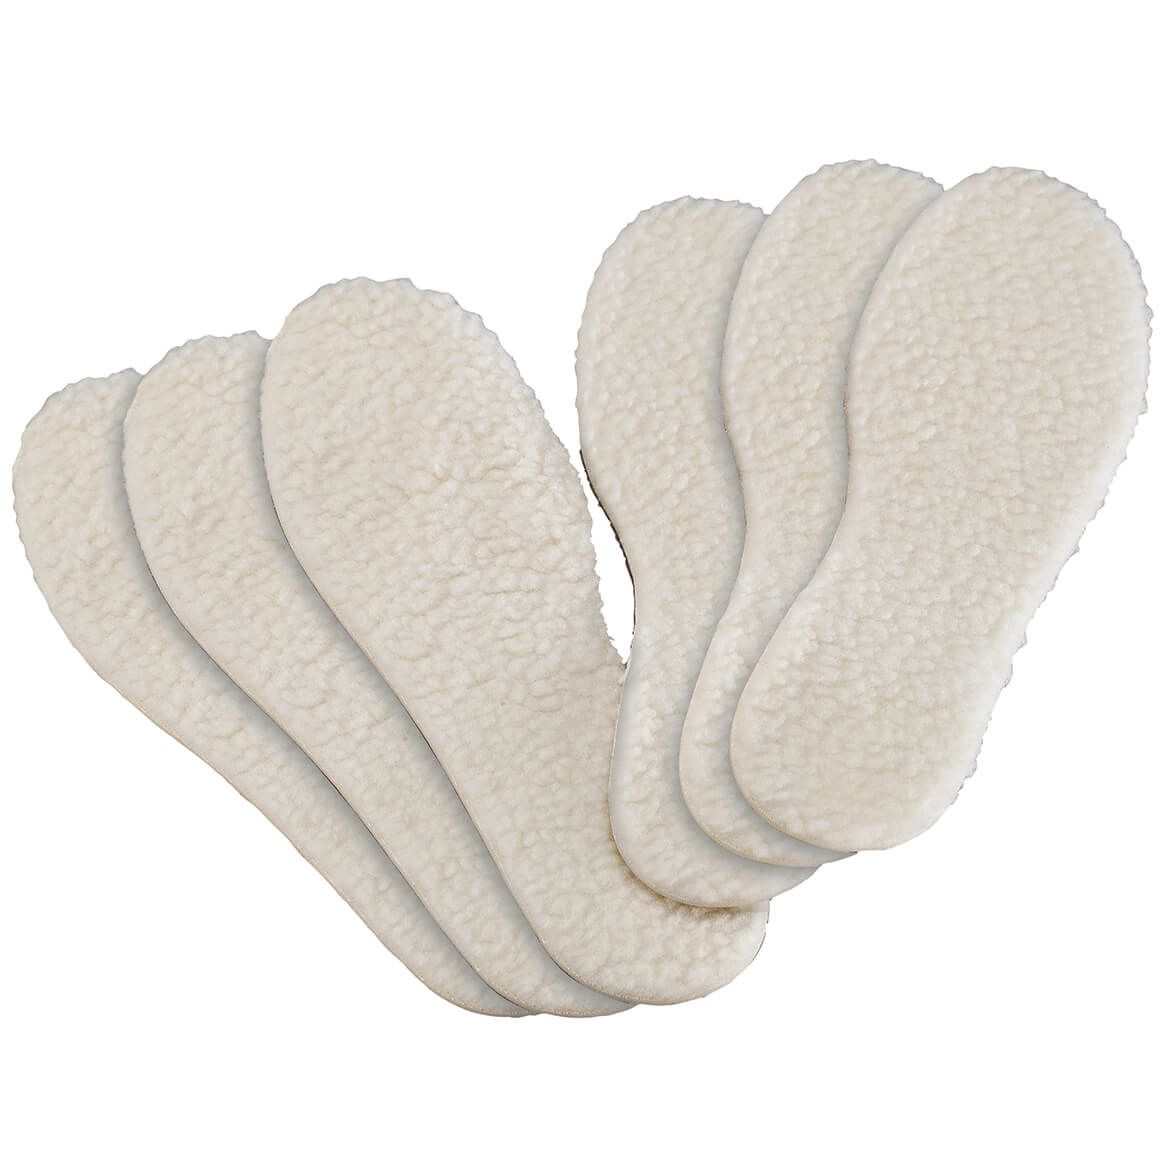 Fuzzy Insoles, Set of 3 Pairs + '-' + 376541